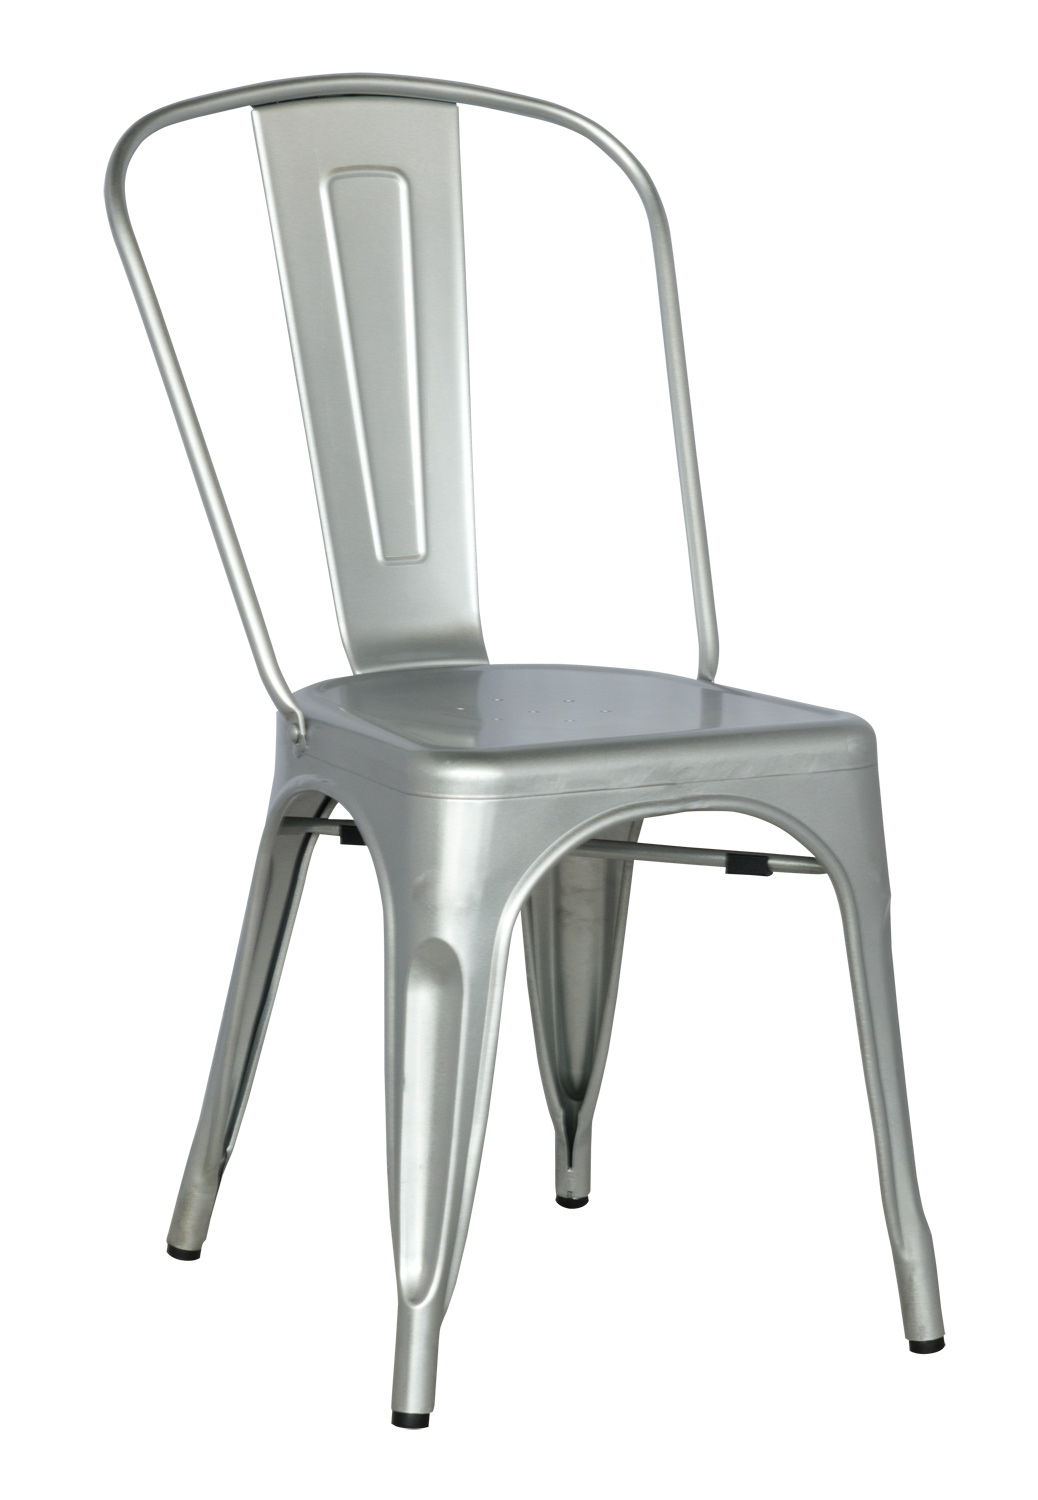 Chintaly Imports 8022 Galvanized Steel Side Chair - Shiny Silver